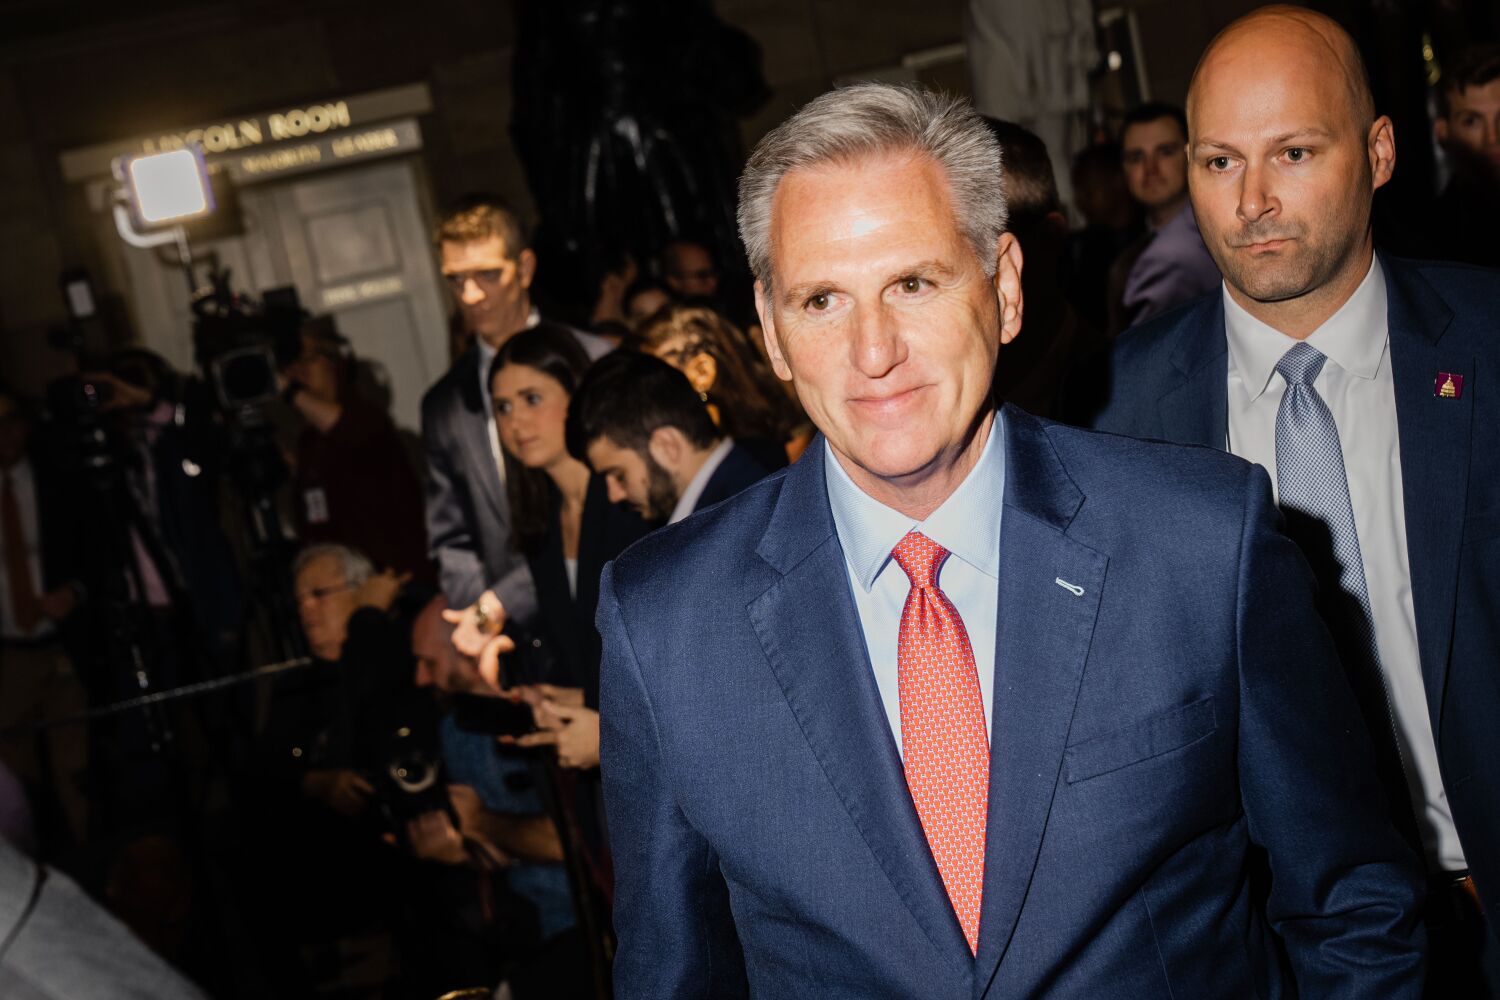 Here's what's in Biden-McCarthy's deal to raise the debt limit